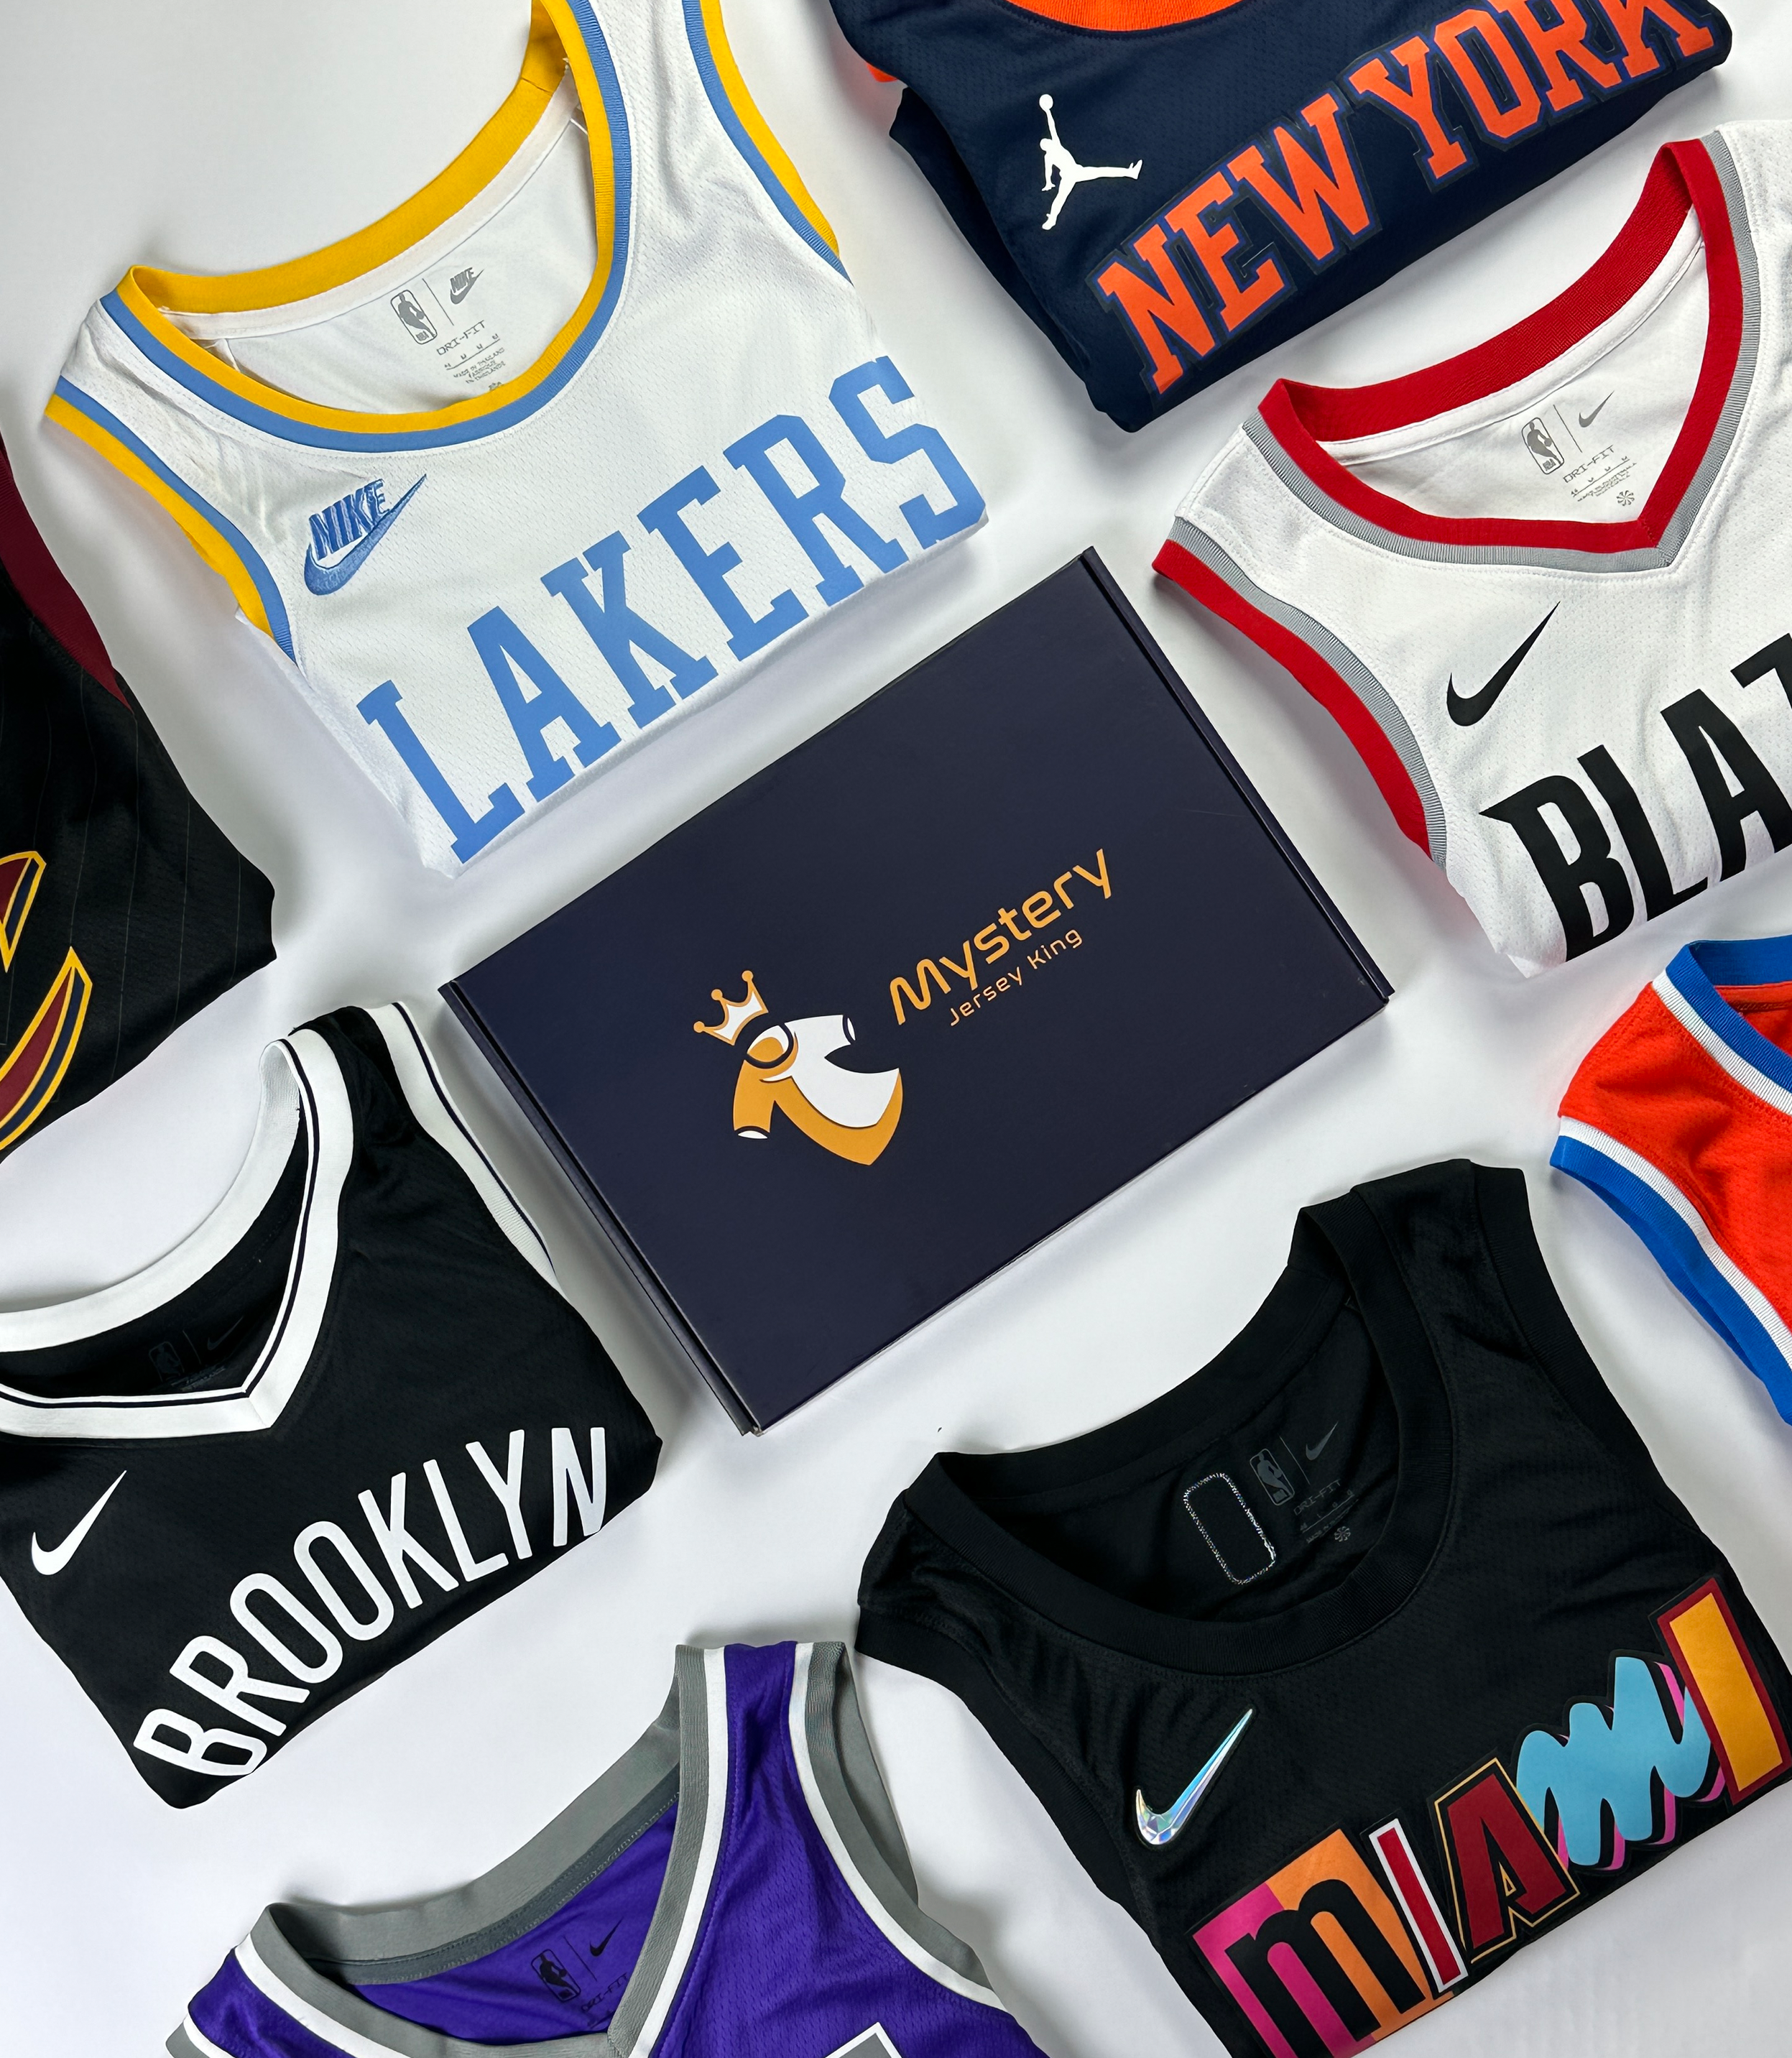 Mystery Basketball Jersey Get Yours Mystery Jersey Suitable 